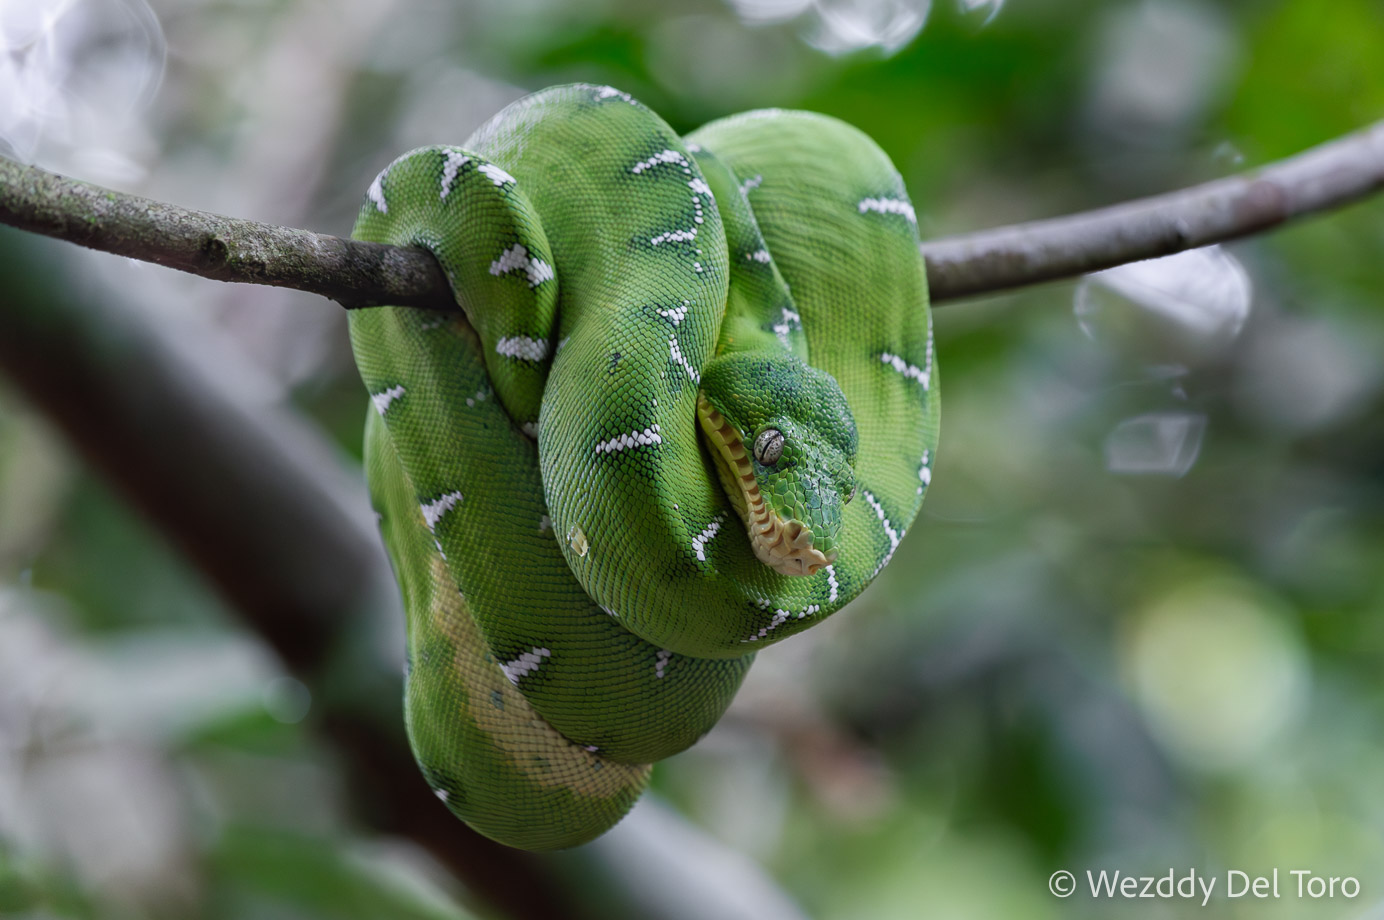 Emerald tree boa snake (“Cobra papagaio”, Corallus caninus)  resting on a vine after coming out of the water.